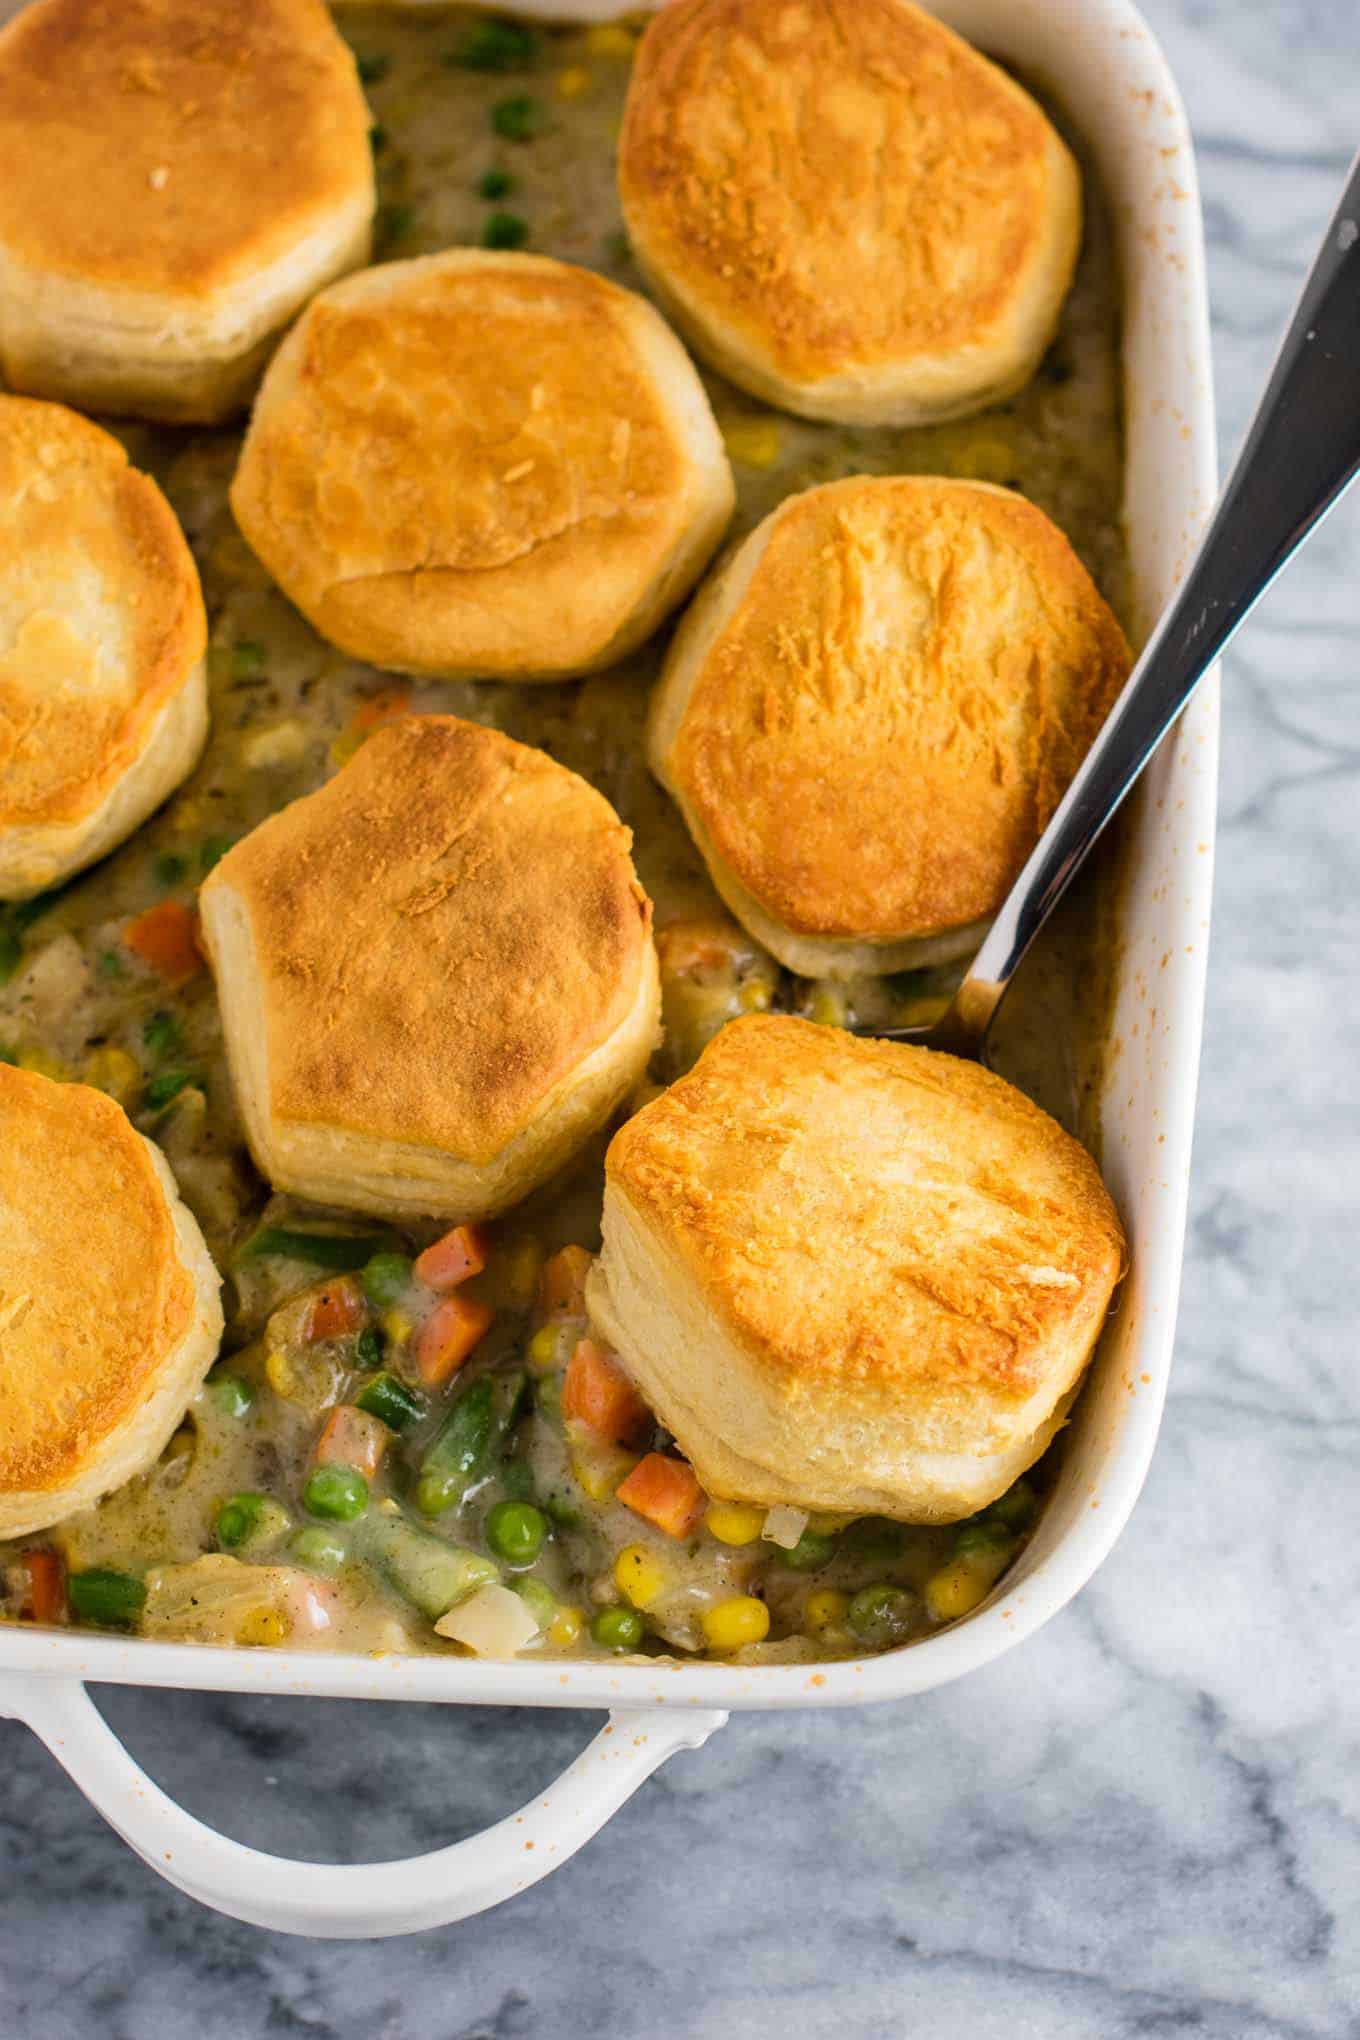 Deconstructed Veggie Pot Pie Recipe with flaky biscuits on top. A delicious twist on a classic recipe that is so simple to make. Easy delicious meatless dinner! #veggiepotpie #vegetarian #meatless #dinner #healthydinner